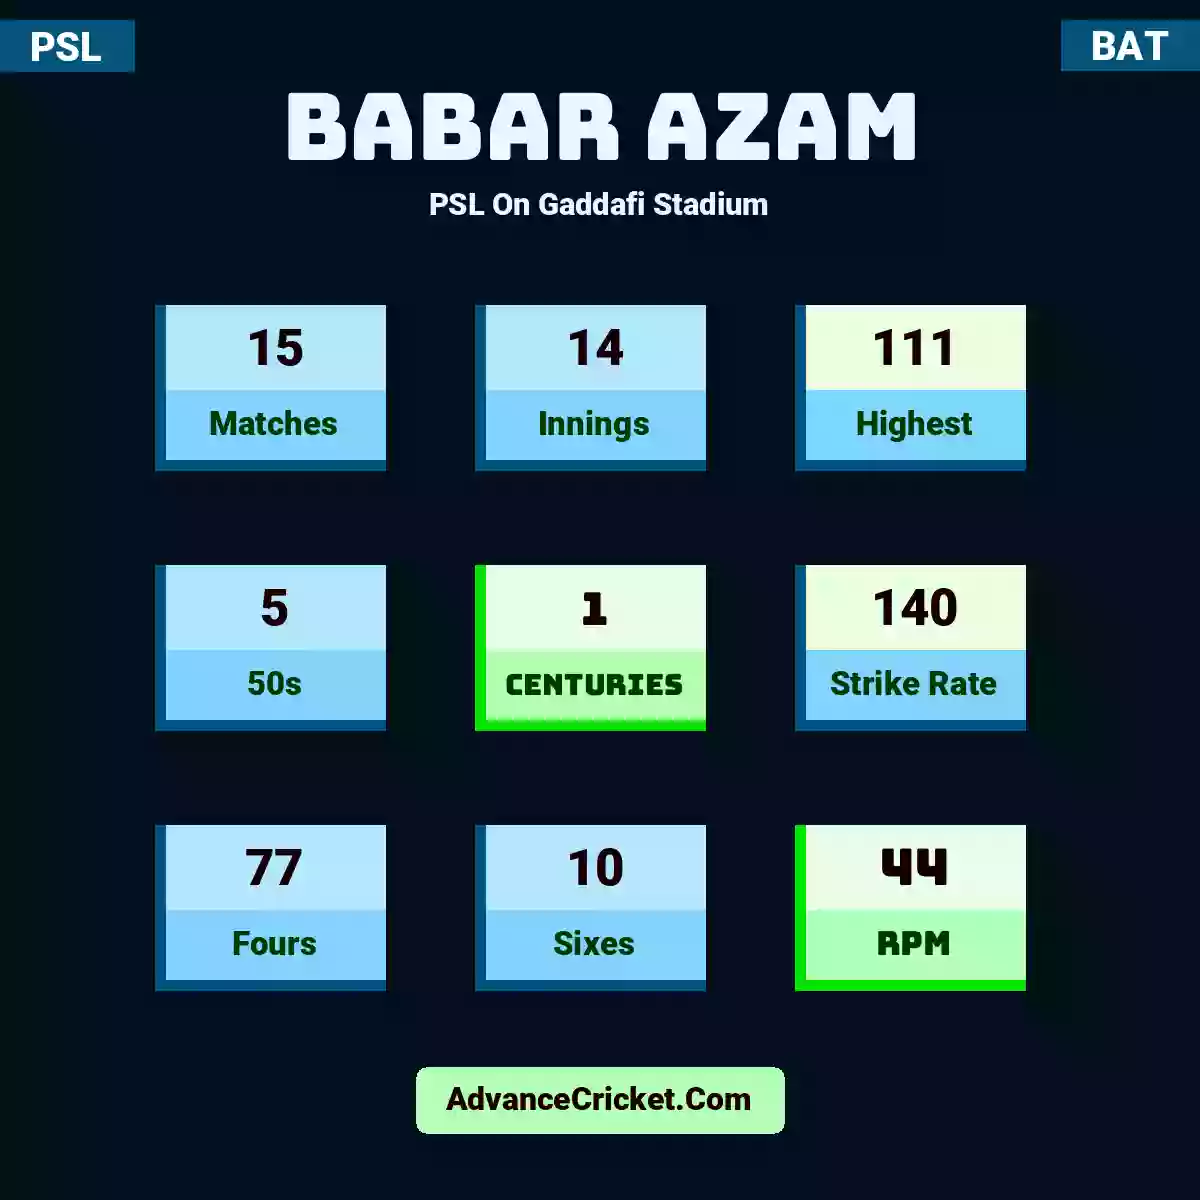 Babar Azam PSL  On Gaddafi Stadium, Babar Azam played 15 matches, scored 111 runs as highest, 5 half-centuries, and 1 centuries, with a strike rate of 140. B.Azam hit 77 fours and 10 sixes, with an RPM of 44.